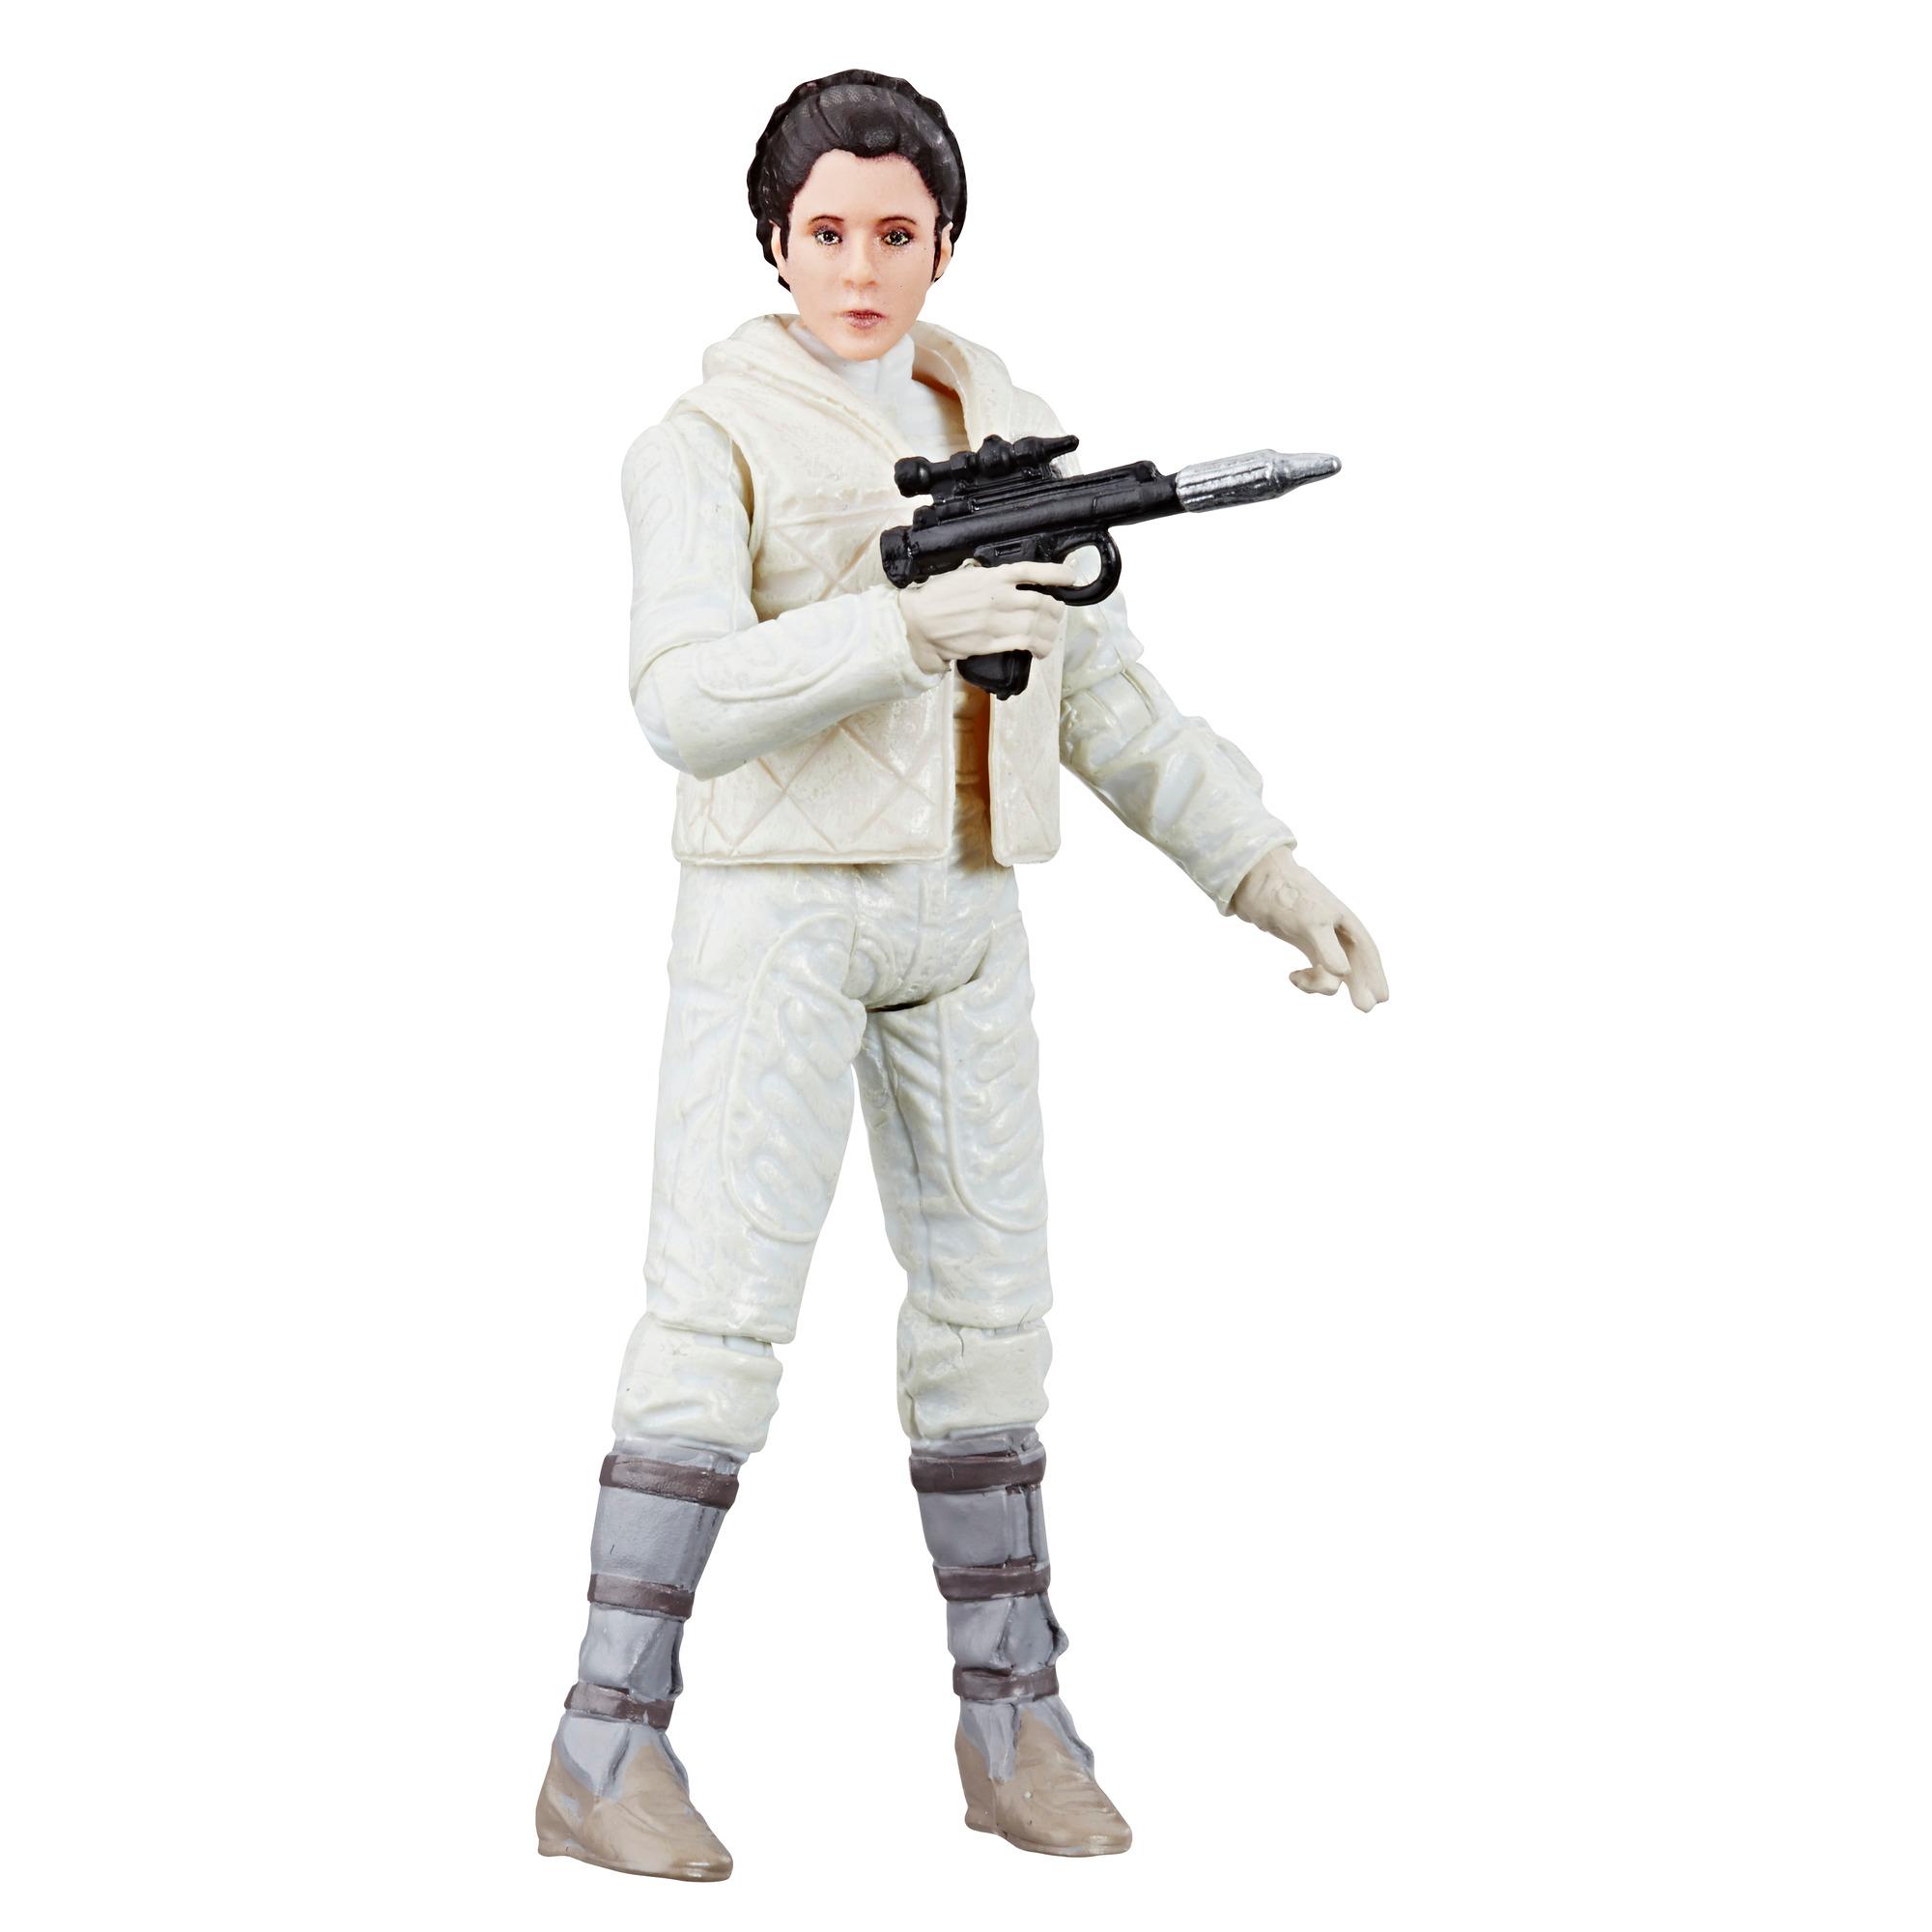 Star Wars The Vintage Collection Star Wars: The Empire Strikes Back Princess Leia Organa (Hoth) 3.75-inch Figure